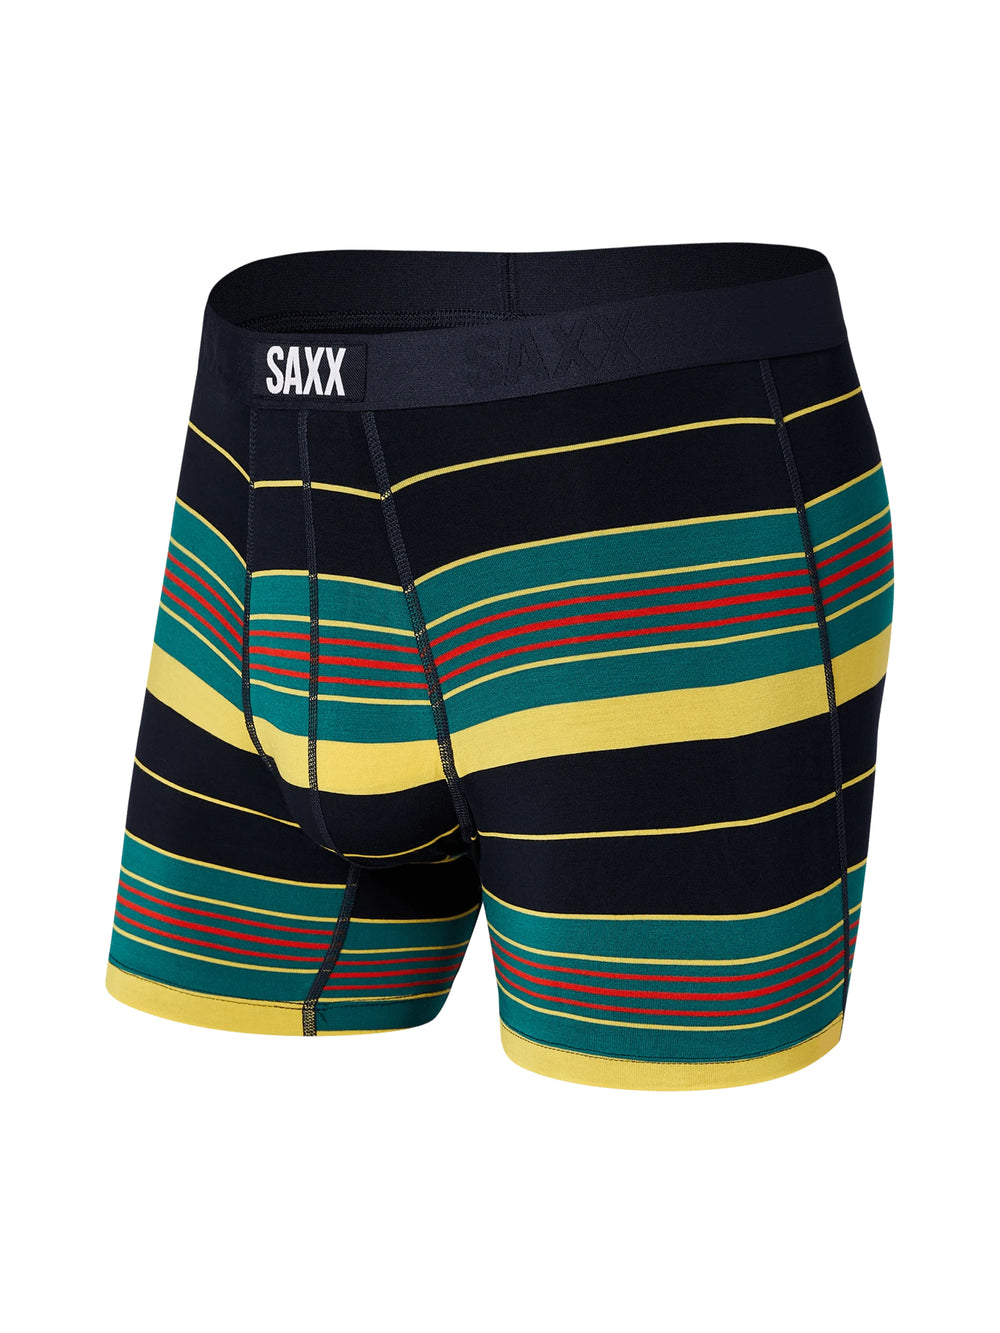 SAXX VIBE BOXER BRIEFING - CLEARANCE